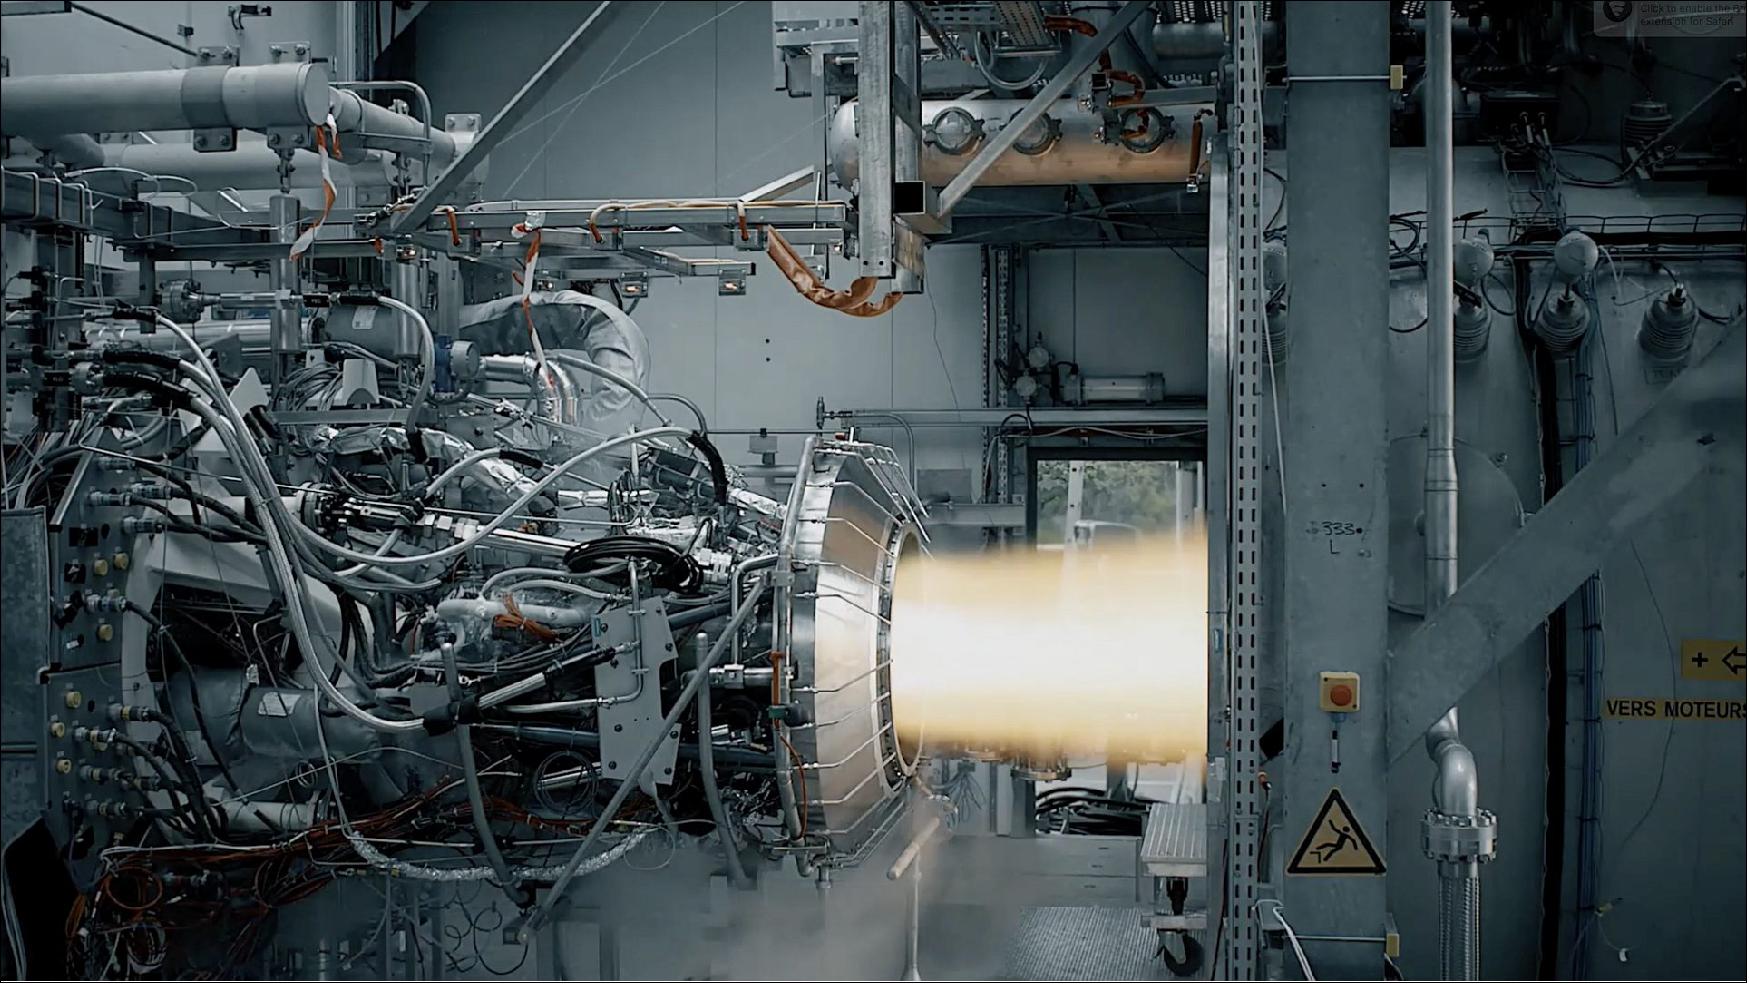 Figure 52: Vinci engine qualified in tests. Vinci is the re-ignitable engine of the upper stage that increases the operational flexibility of Ariane 6 and ensures that the engine safely deorbits at the end of the mission. This engine was successfully tested more than 140 times and reignited multiple times in succession in near vacuum to complete its qualification (image credit: ArianeGroup)